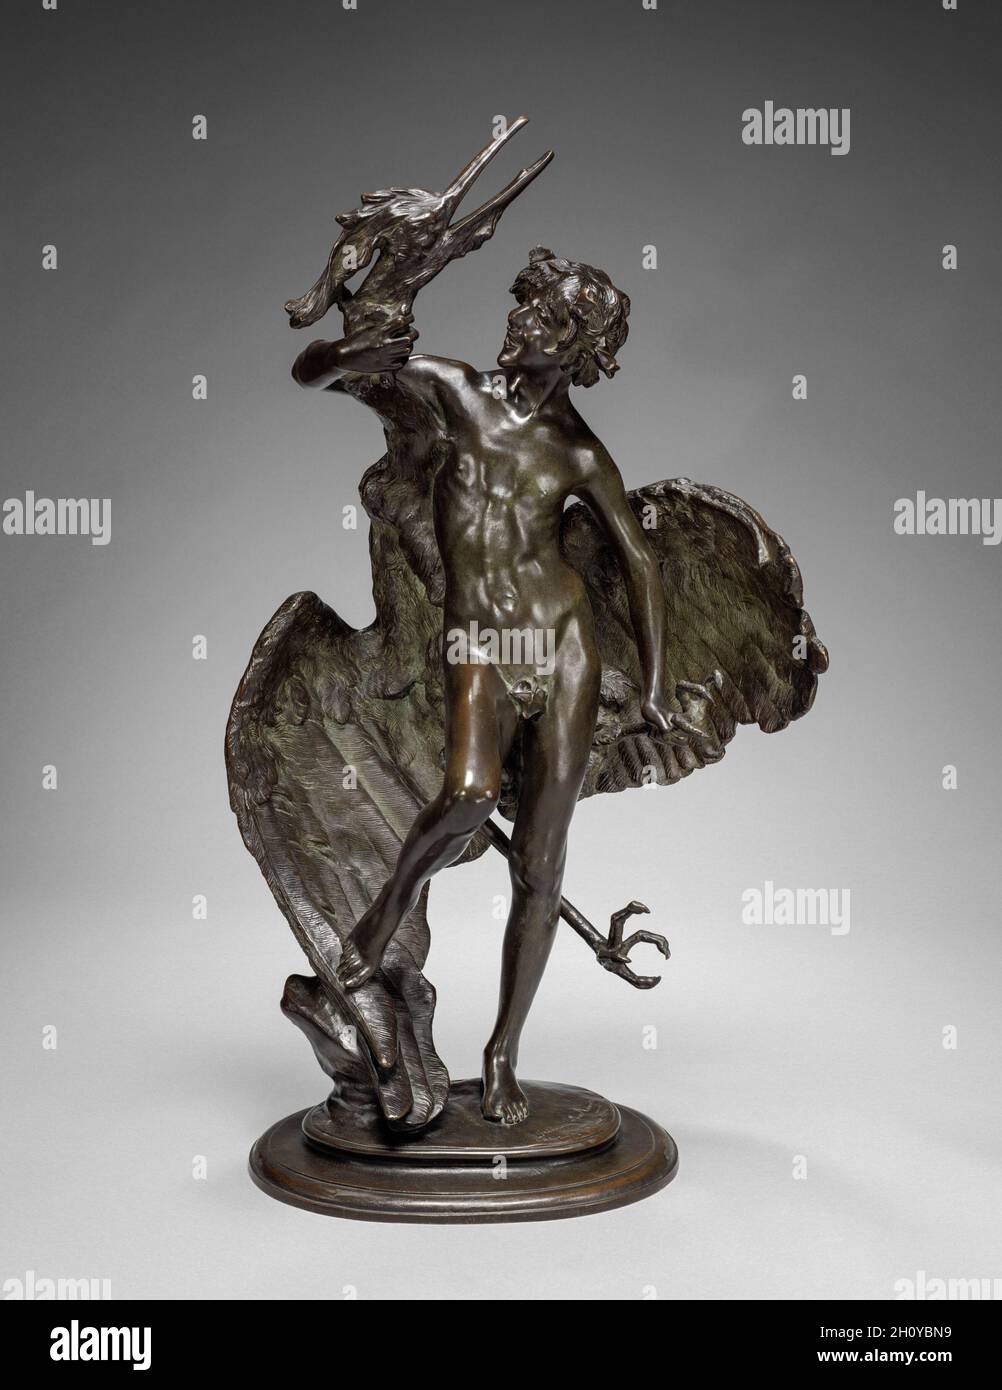 Young Faun with Heron, 1890. Frederick William MacMonnies (American, 1863-1937). Bronze; overall: 68.6 cm (27 in.).  MacMonnies originally created this composition as a large garden sculpture, but later marketed small-scale versions, such as this example, to adorn interior spaces. The subject presents a boyish mythological figure mischievously grasping a bird whose ample wings curve around him. A striking visual contrast is achieved through the variegated textures of the heron’s feathers and the faun’s smooth flesh. Stock Photo